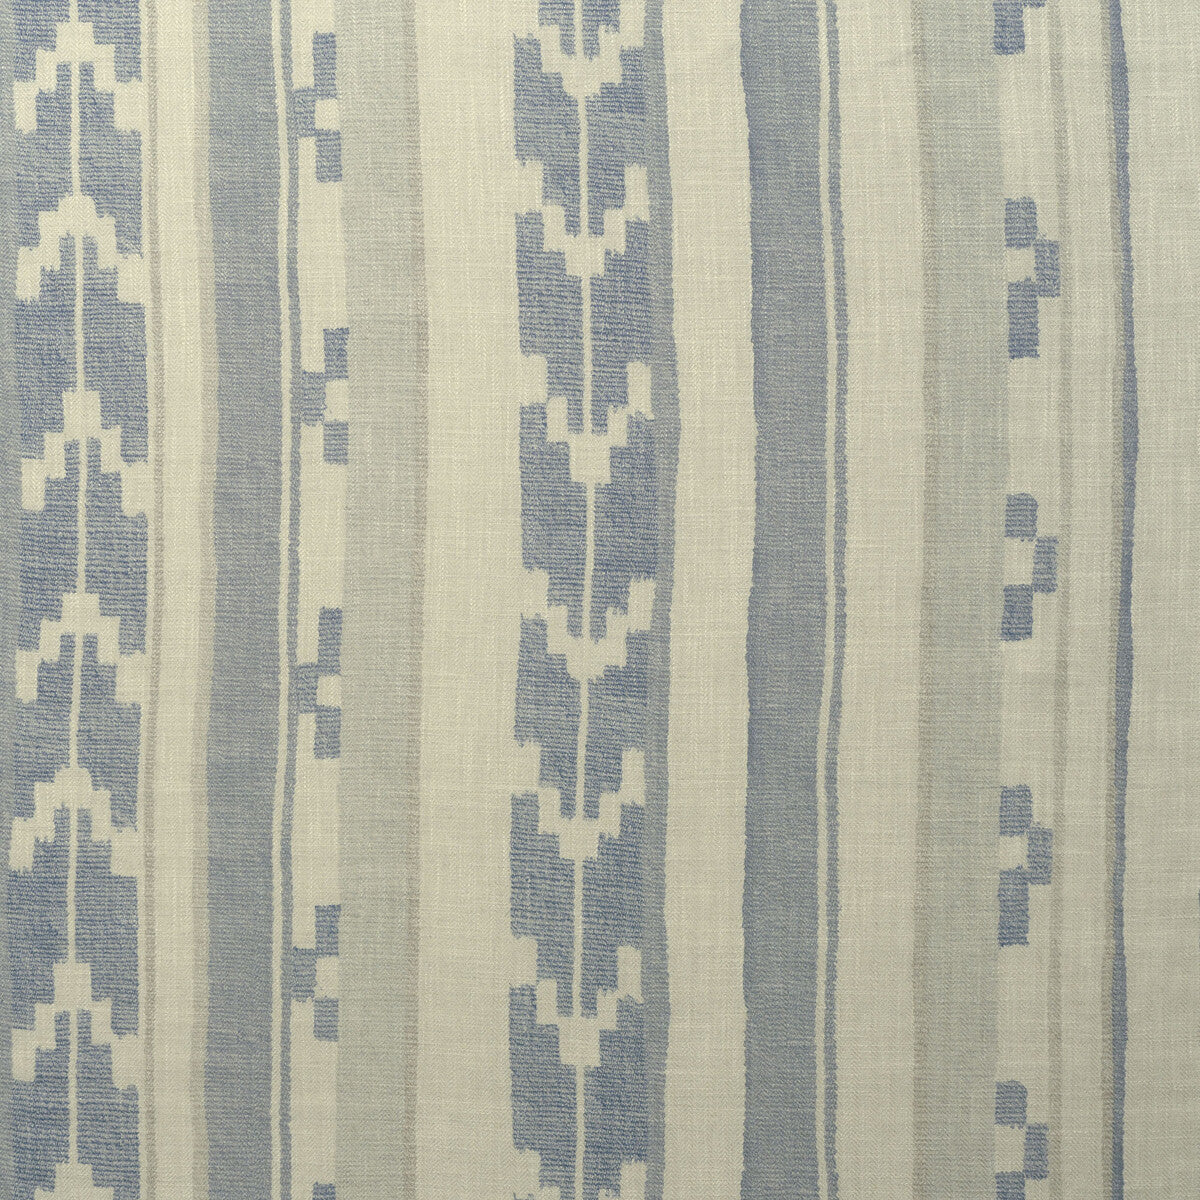 Indus fabric in denim color - pattern AM100338.511.0 - by Kravet Couture in the Andrew Martin Hindukush collection